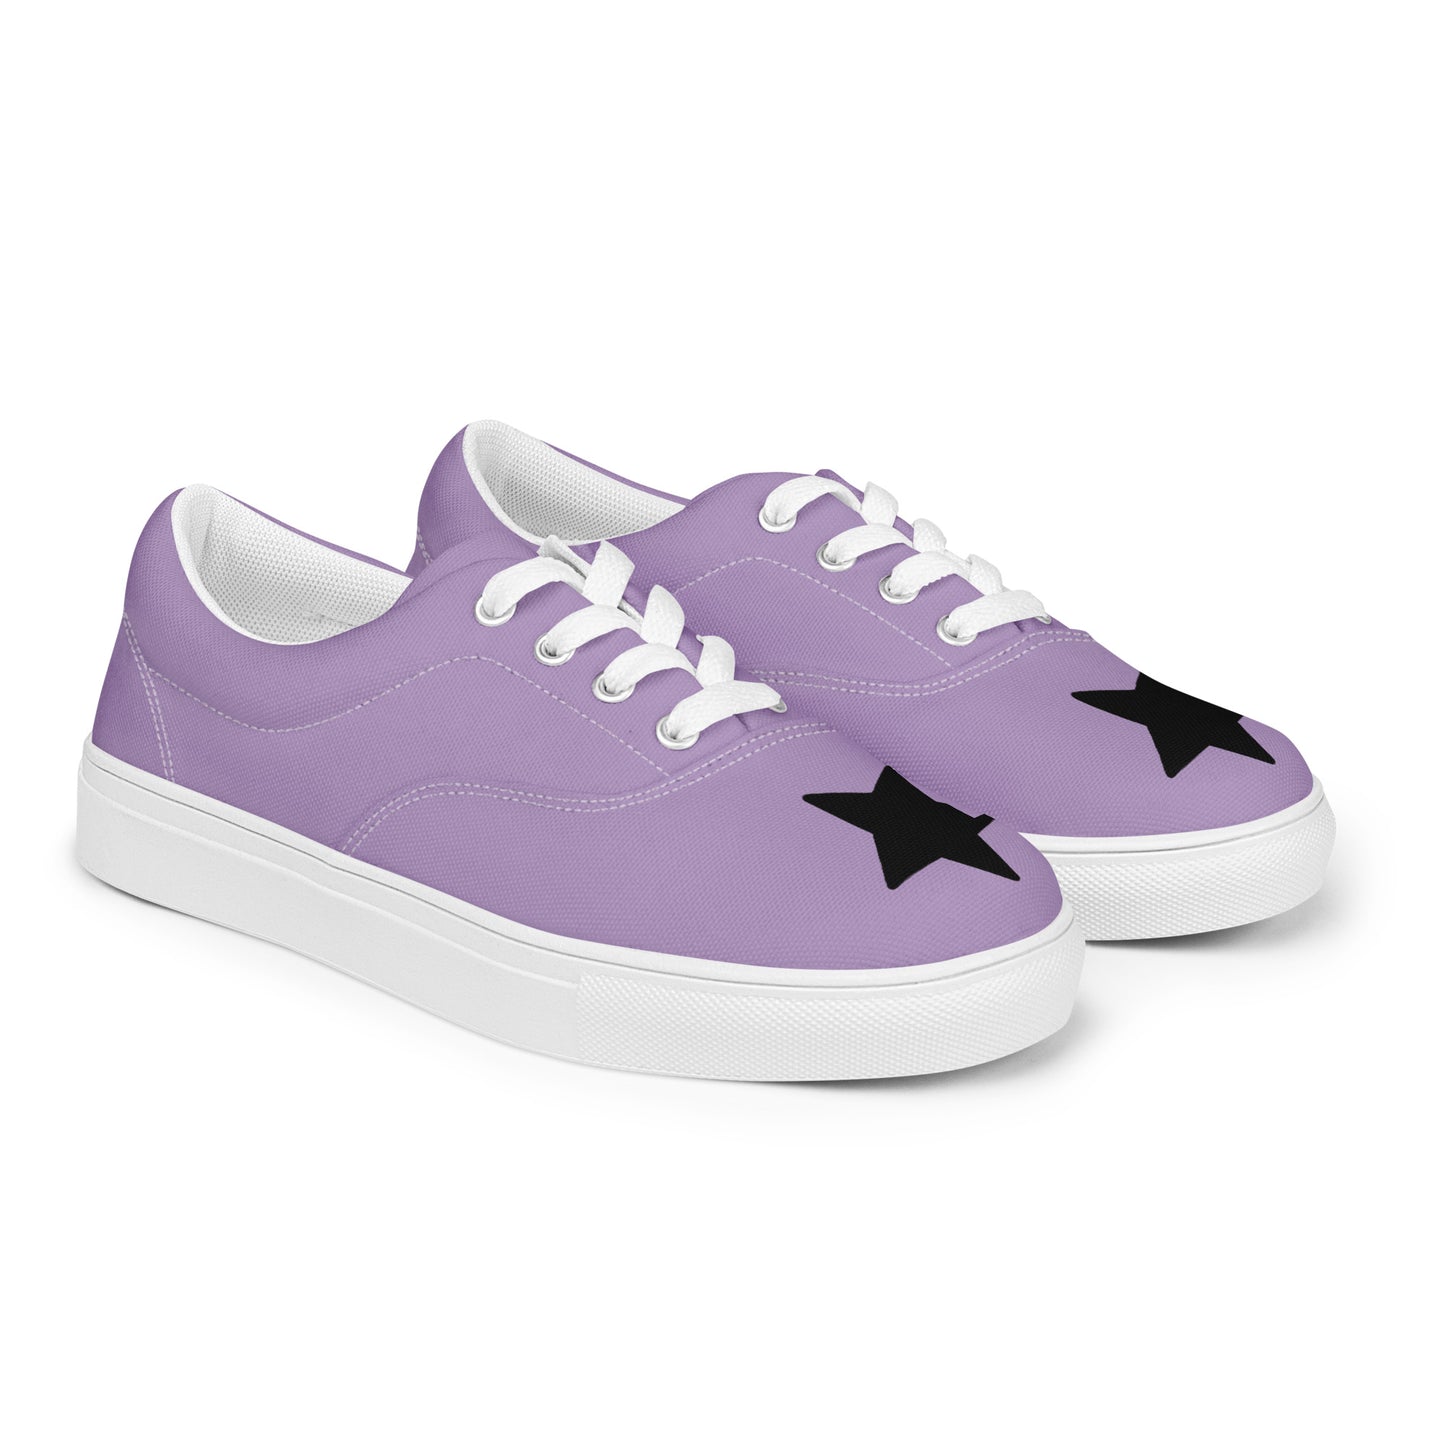 Women’s Black Star East Side Lace-up Canvas Shoes